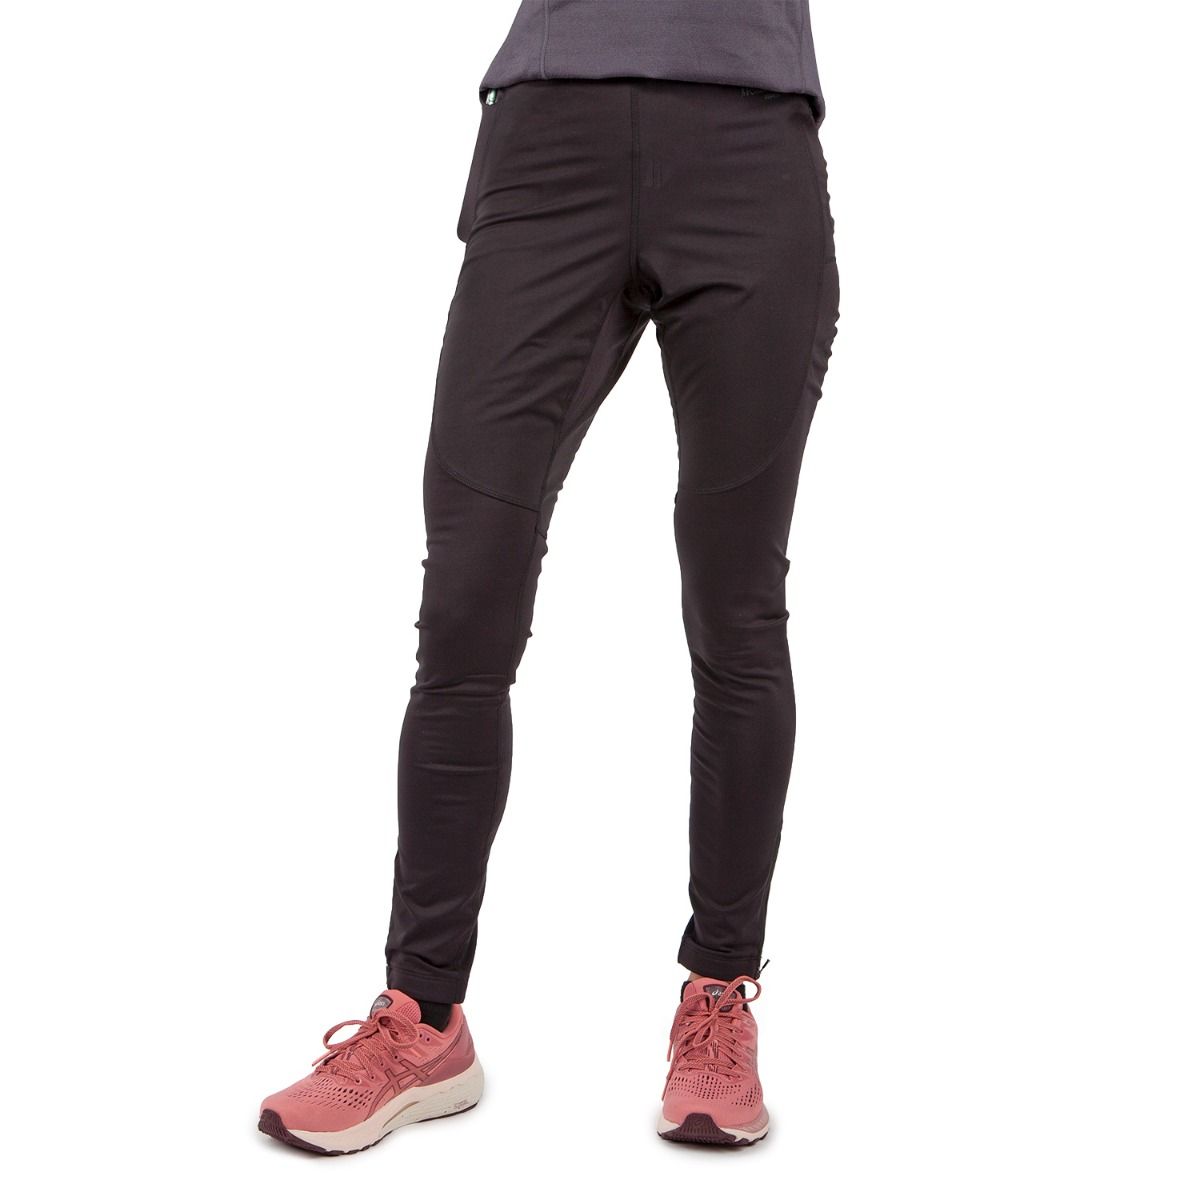 Running Room Women's Brushed Back Thermal Run Tight